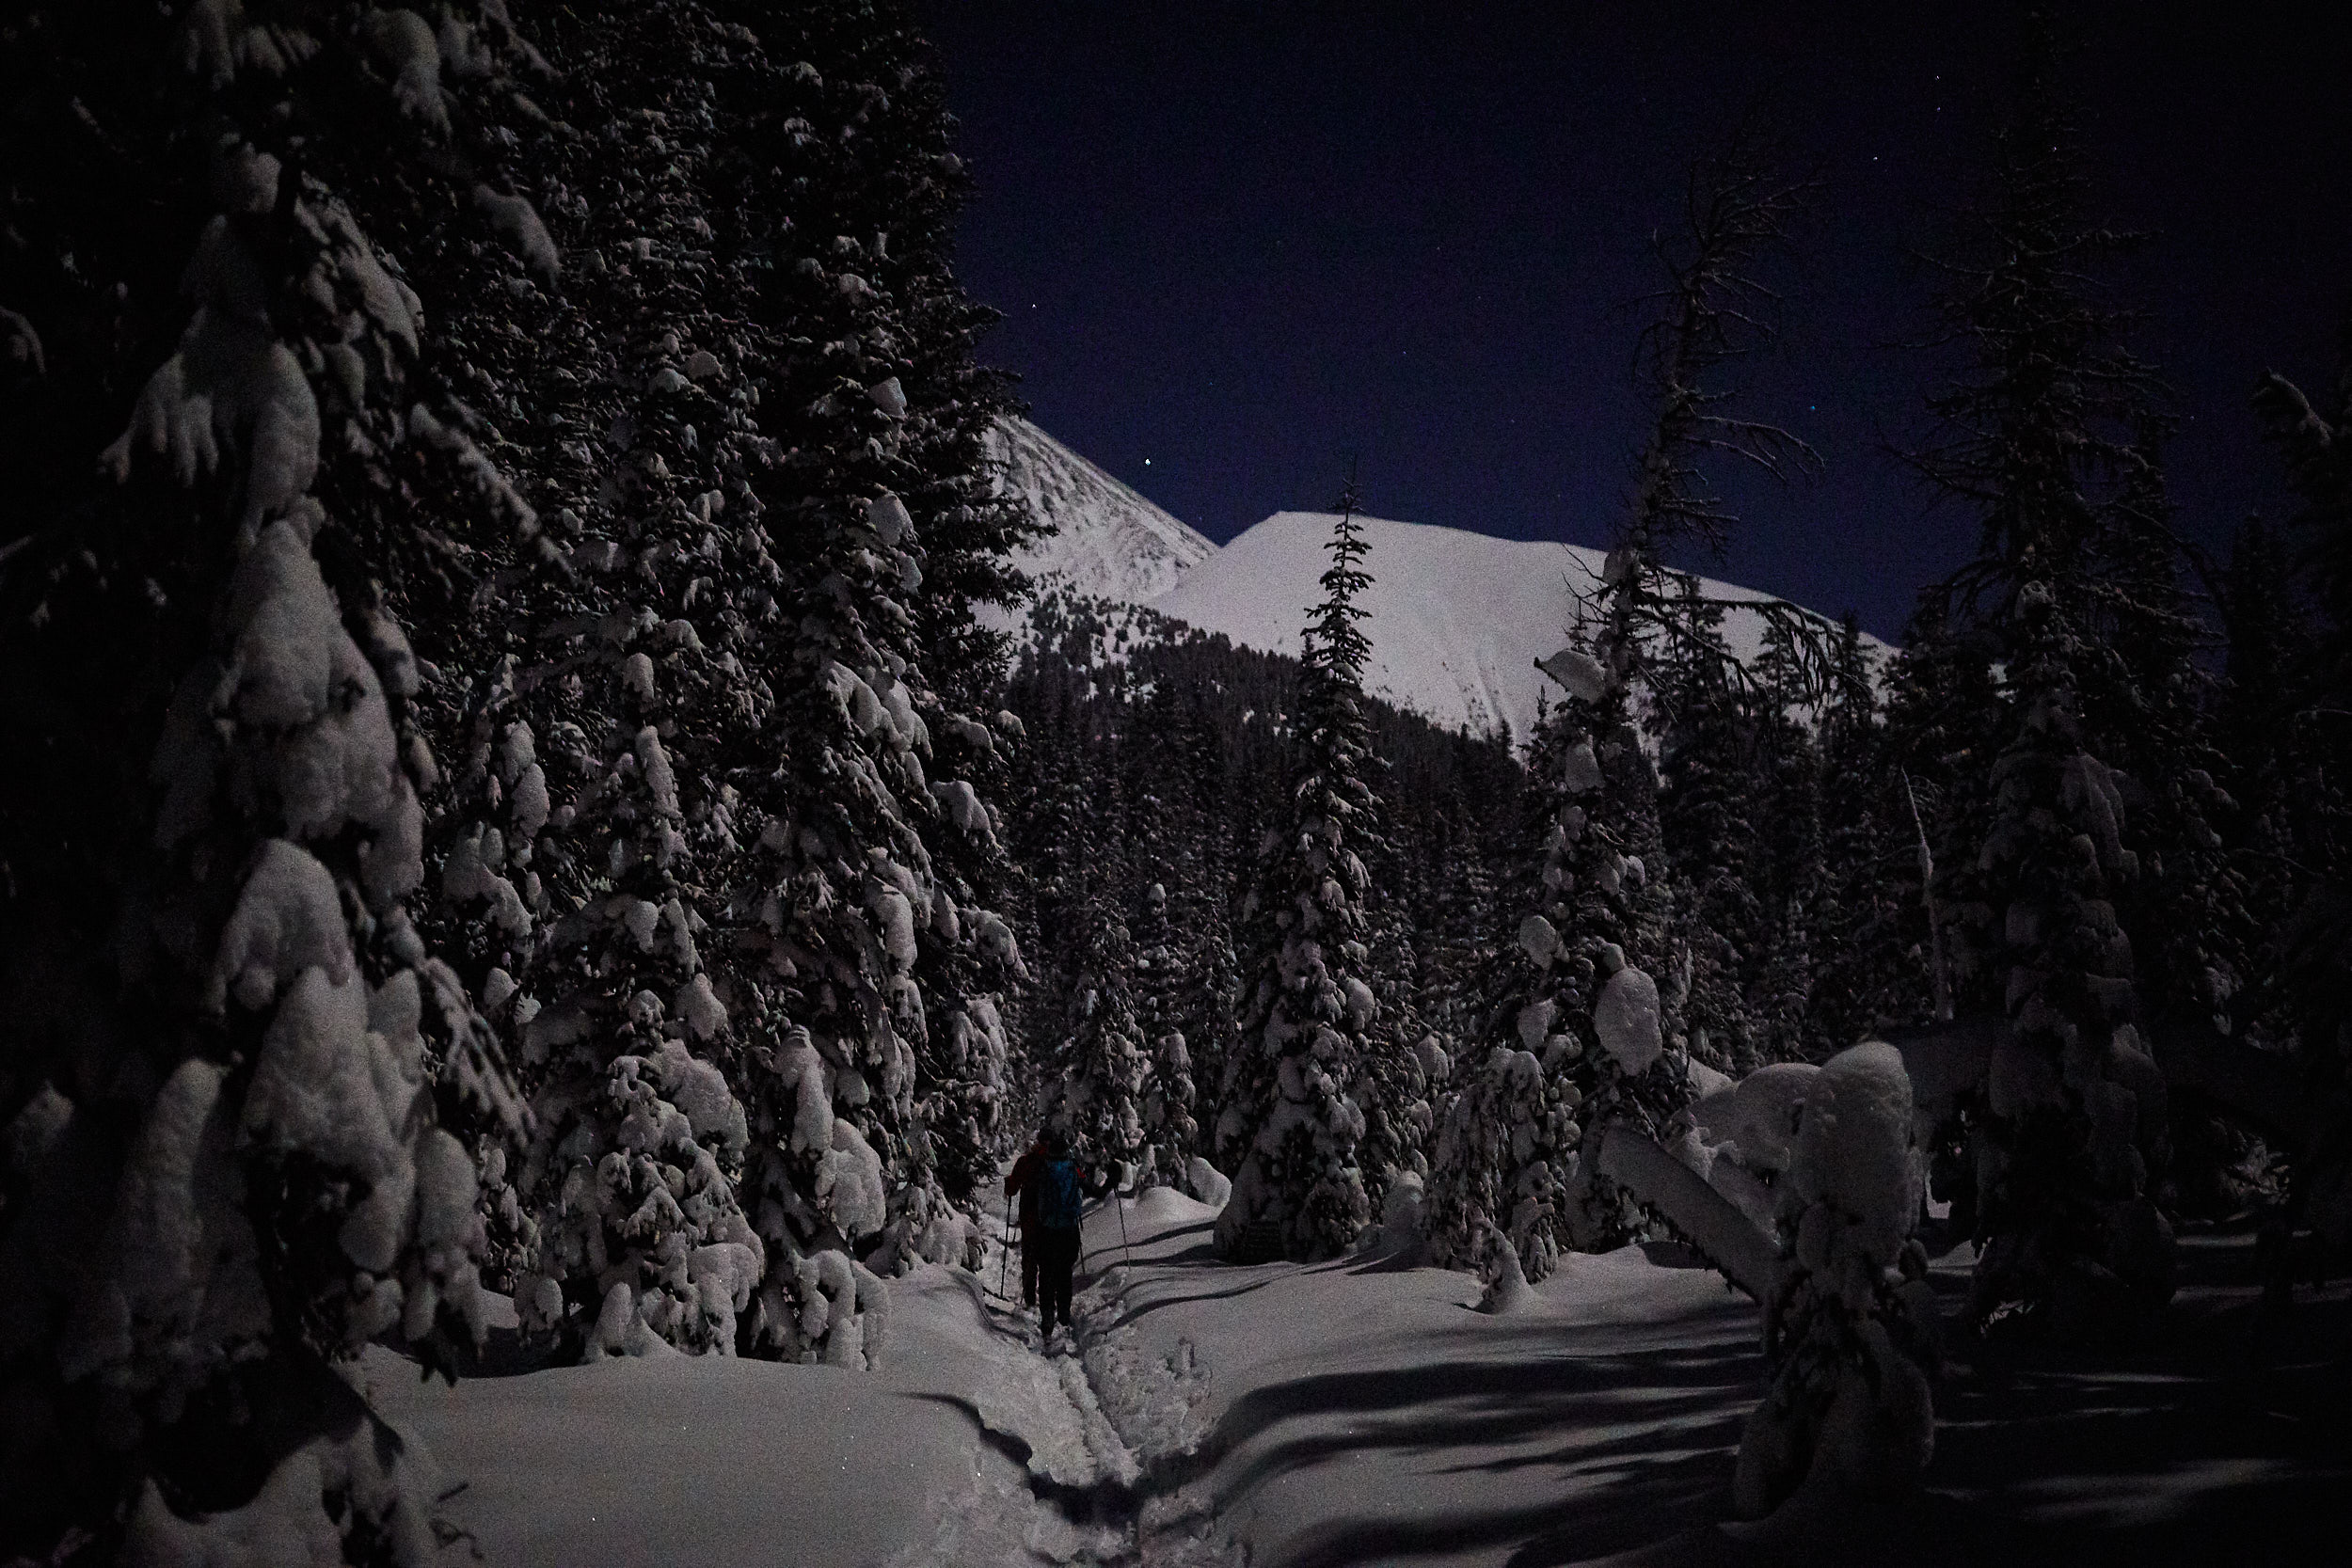  With the moon and fresh snow reflecting the light, no headlamps were needed. 